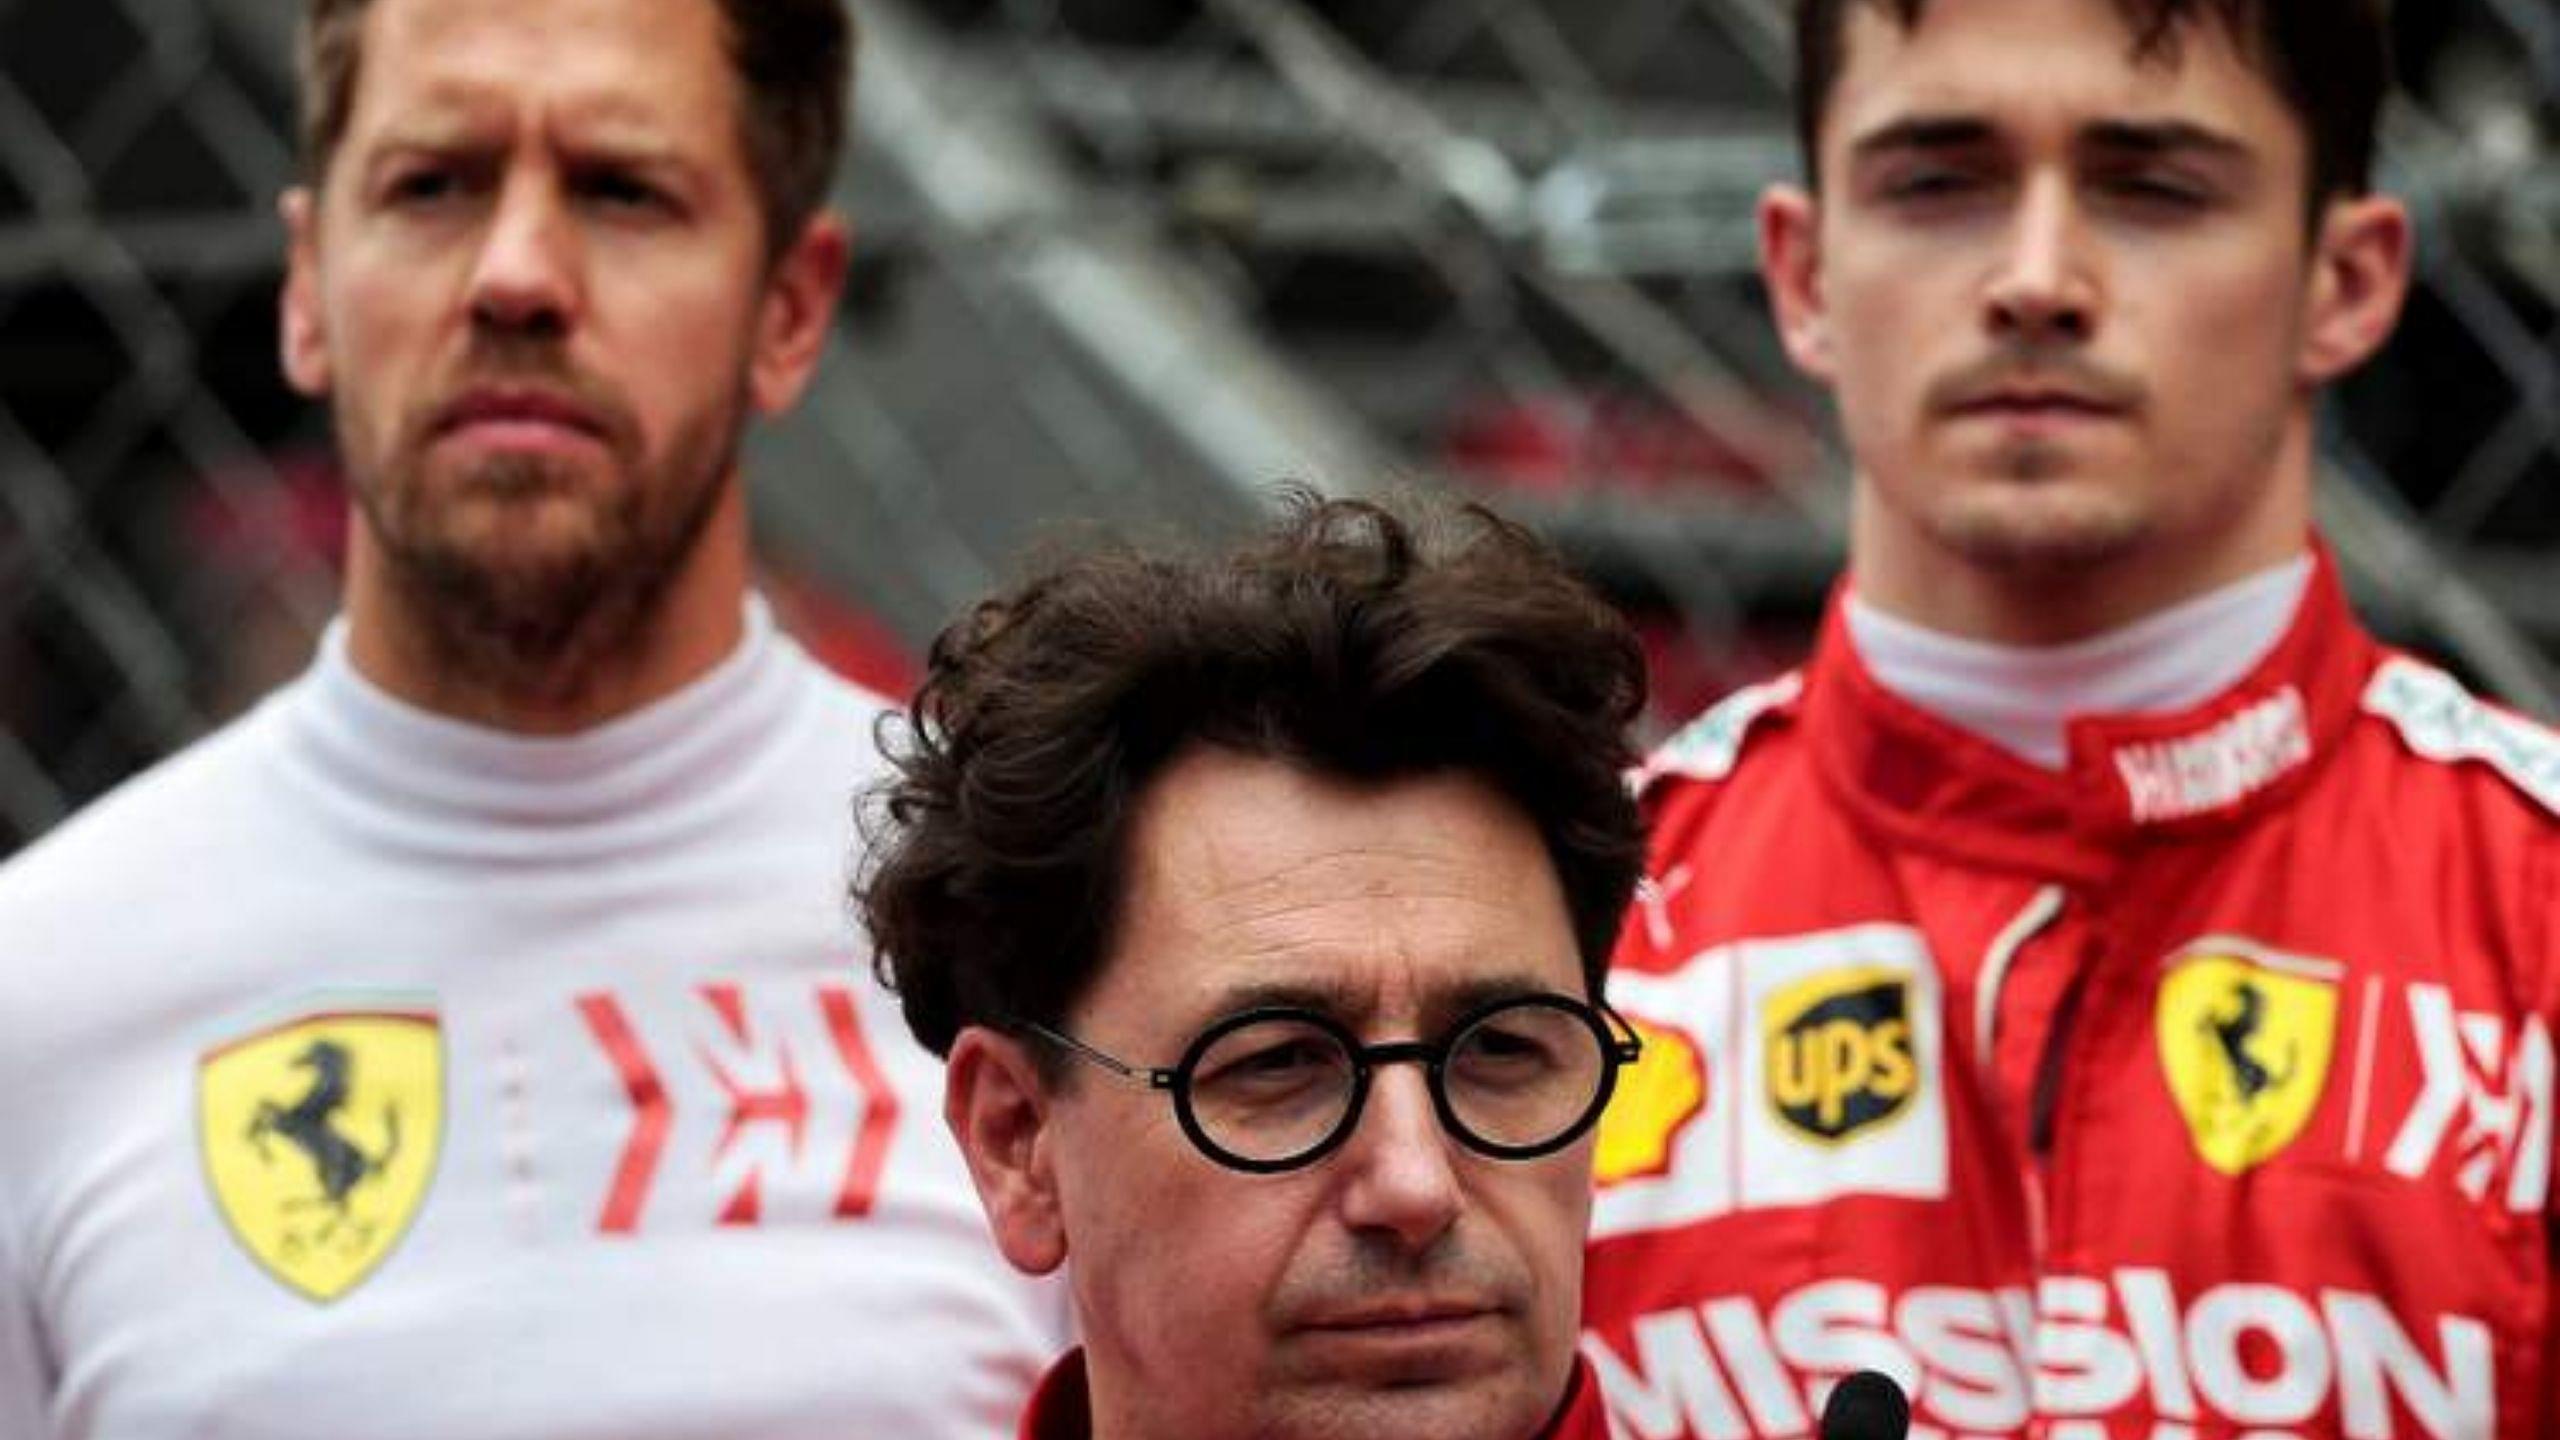 "Arrivabene really has a big heart” - Sebastian Vettel and Mattia Binotto did not get along too well at Ferrari, and unsurprisingly, the former has ignored the latter in his list of people who mattered during his Ferrari stint.